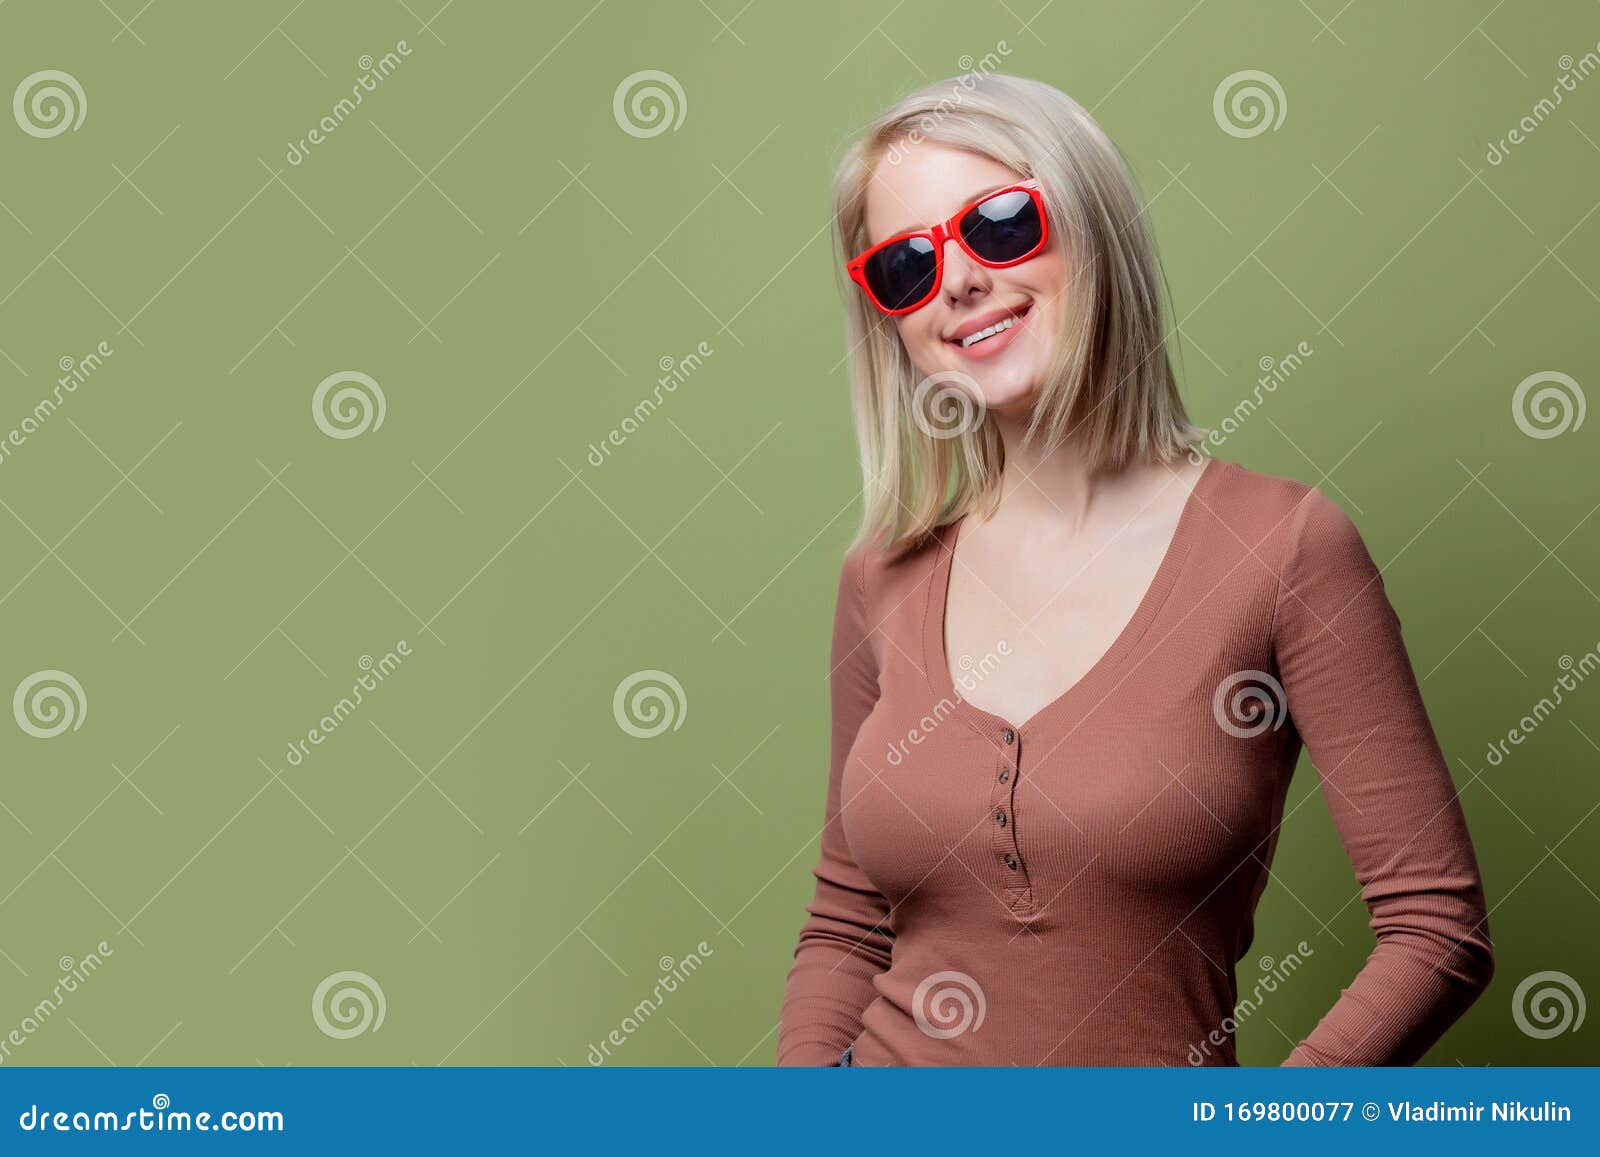 Beautiful Blonde Girl In A Sunglasses And Blouse Stock Image Image Of